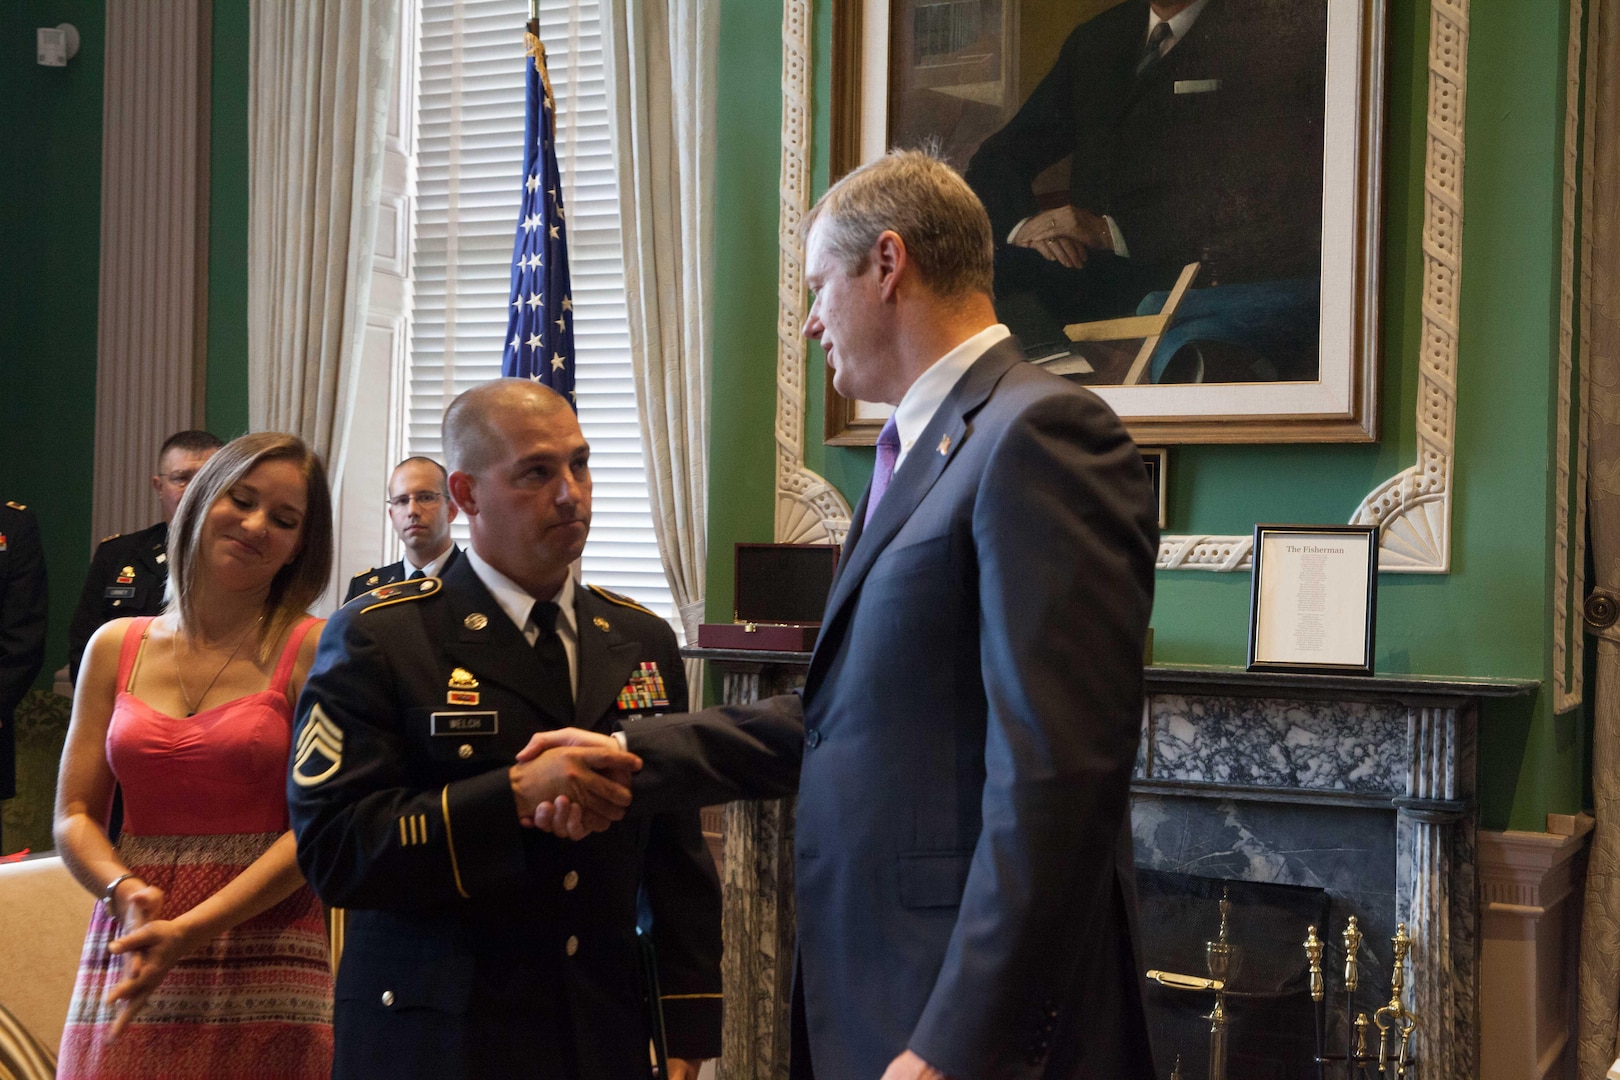 Gov. Charlie Baker awarded the Soldier's Medal to Staff Sgt. Mark Welch, Massachusetts Army National Guard, on July 8, 2015, at the State House. Baker presented the award to Welch for his heroic actions during the 2013 Boston Marathon Bombings. With Welch is his wife, Heather. (Photo by Sgt. Alfred Tripolone)